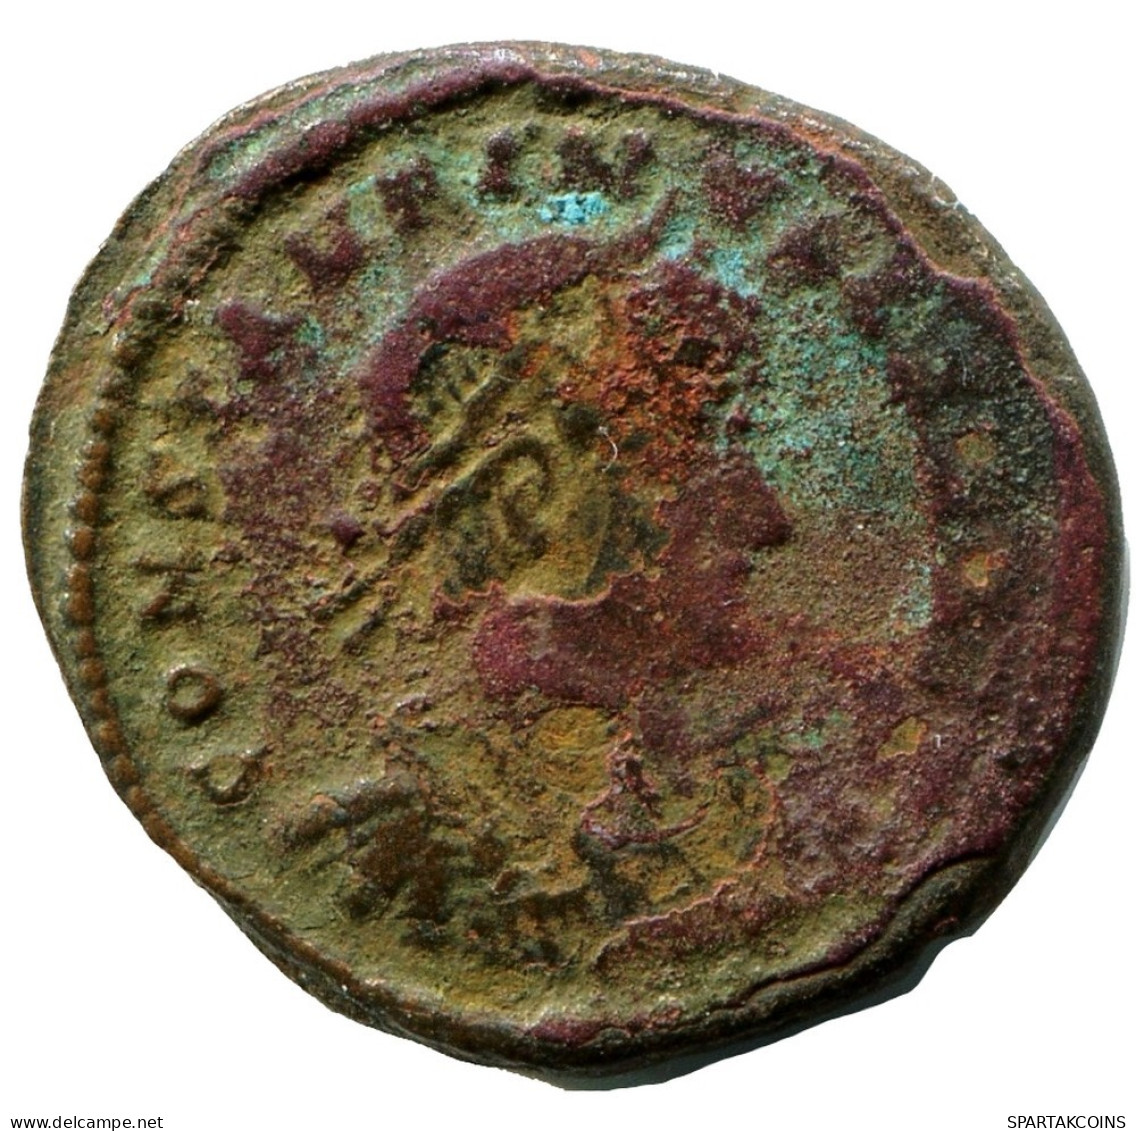 CONSTANTINE I MINTED IN CYZICUS FROM THE ROYAL ONTARIO MUSEUM #ANC10967.14.U.A - El Impero Christiano (307 / 363)